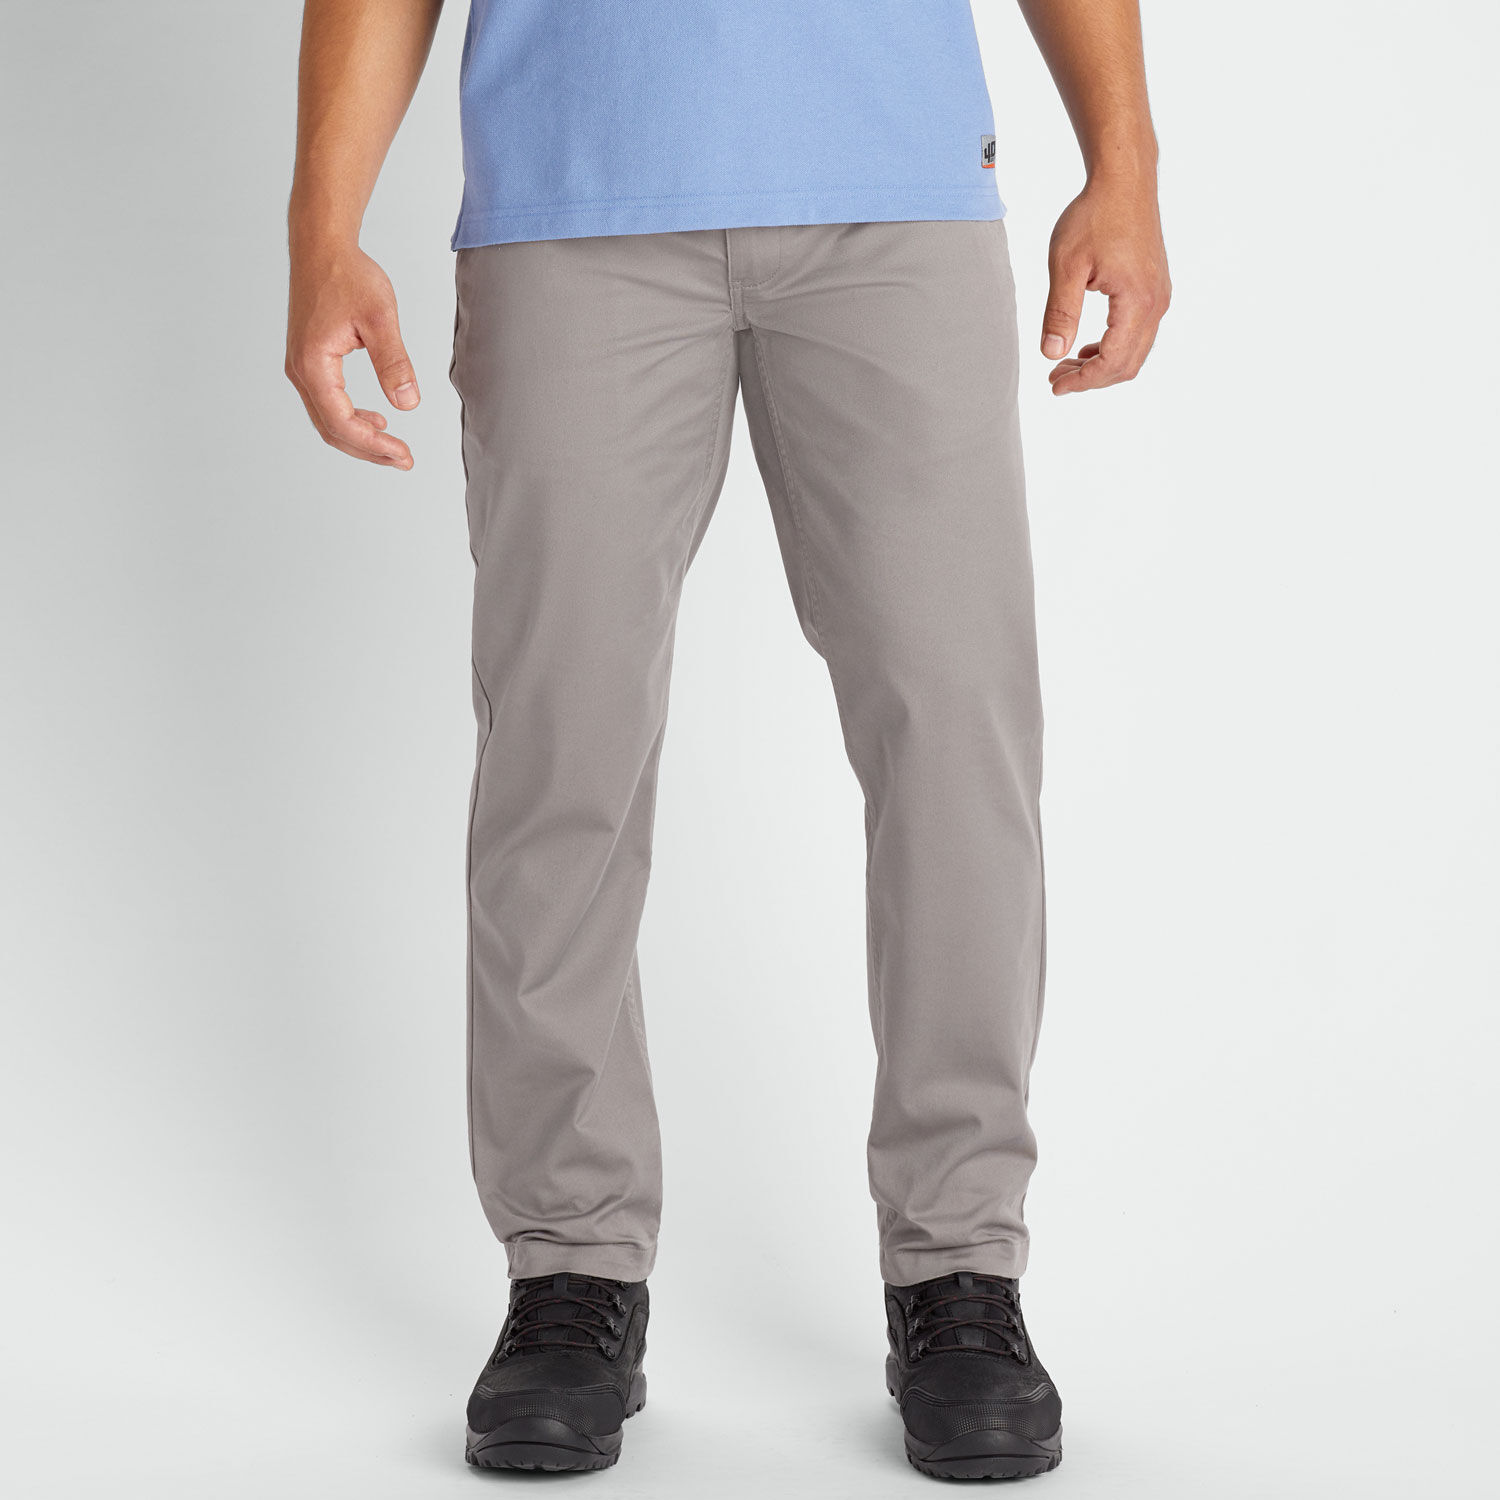 Men's Khaki Poly/wool Trousers, Classic Fit | Service Khaki | Military -  Shop Your Navy Exchange - Official Site